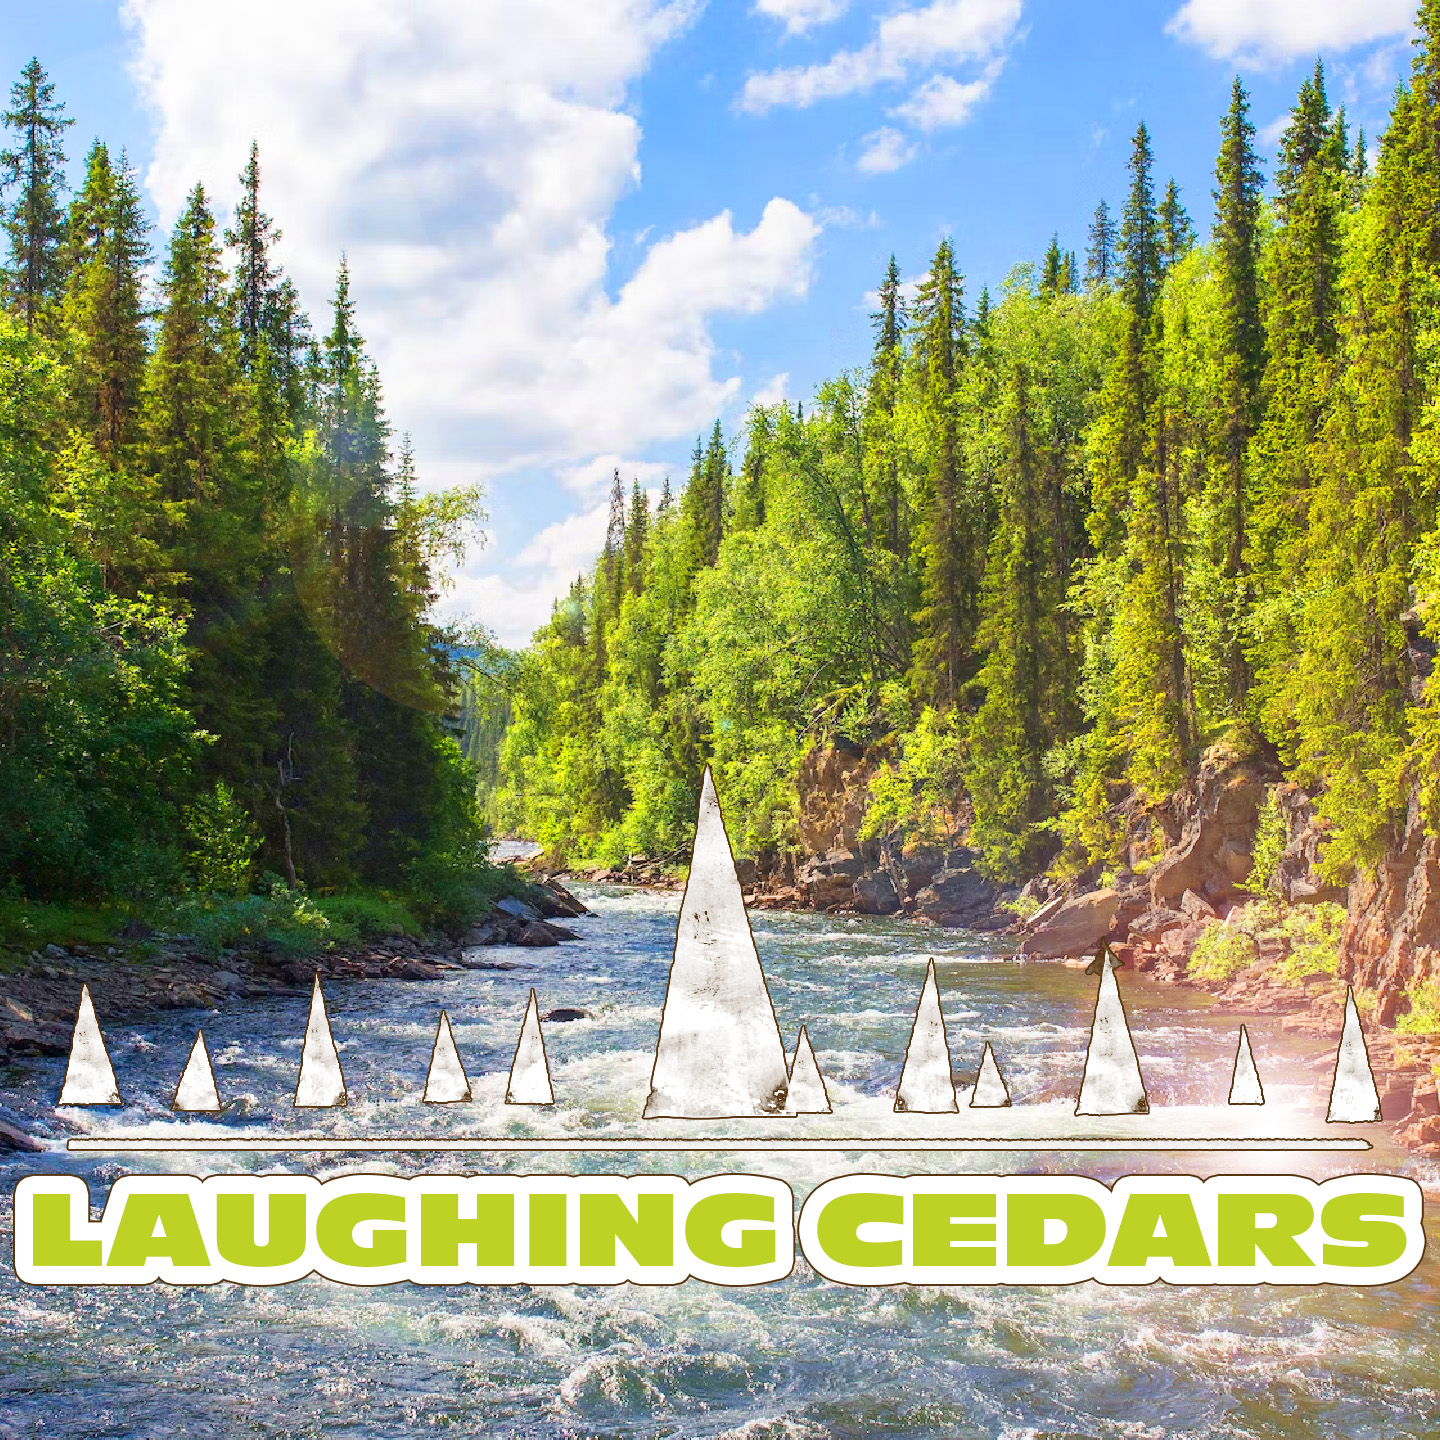 Laughing Cedars 8: The Mills